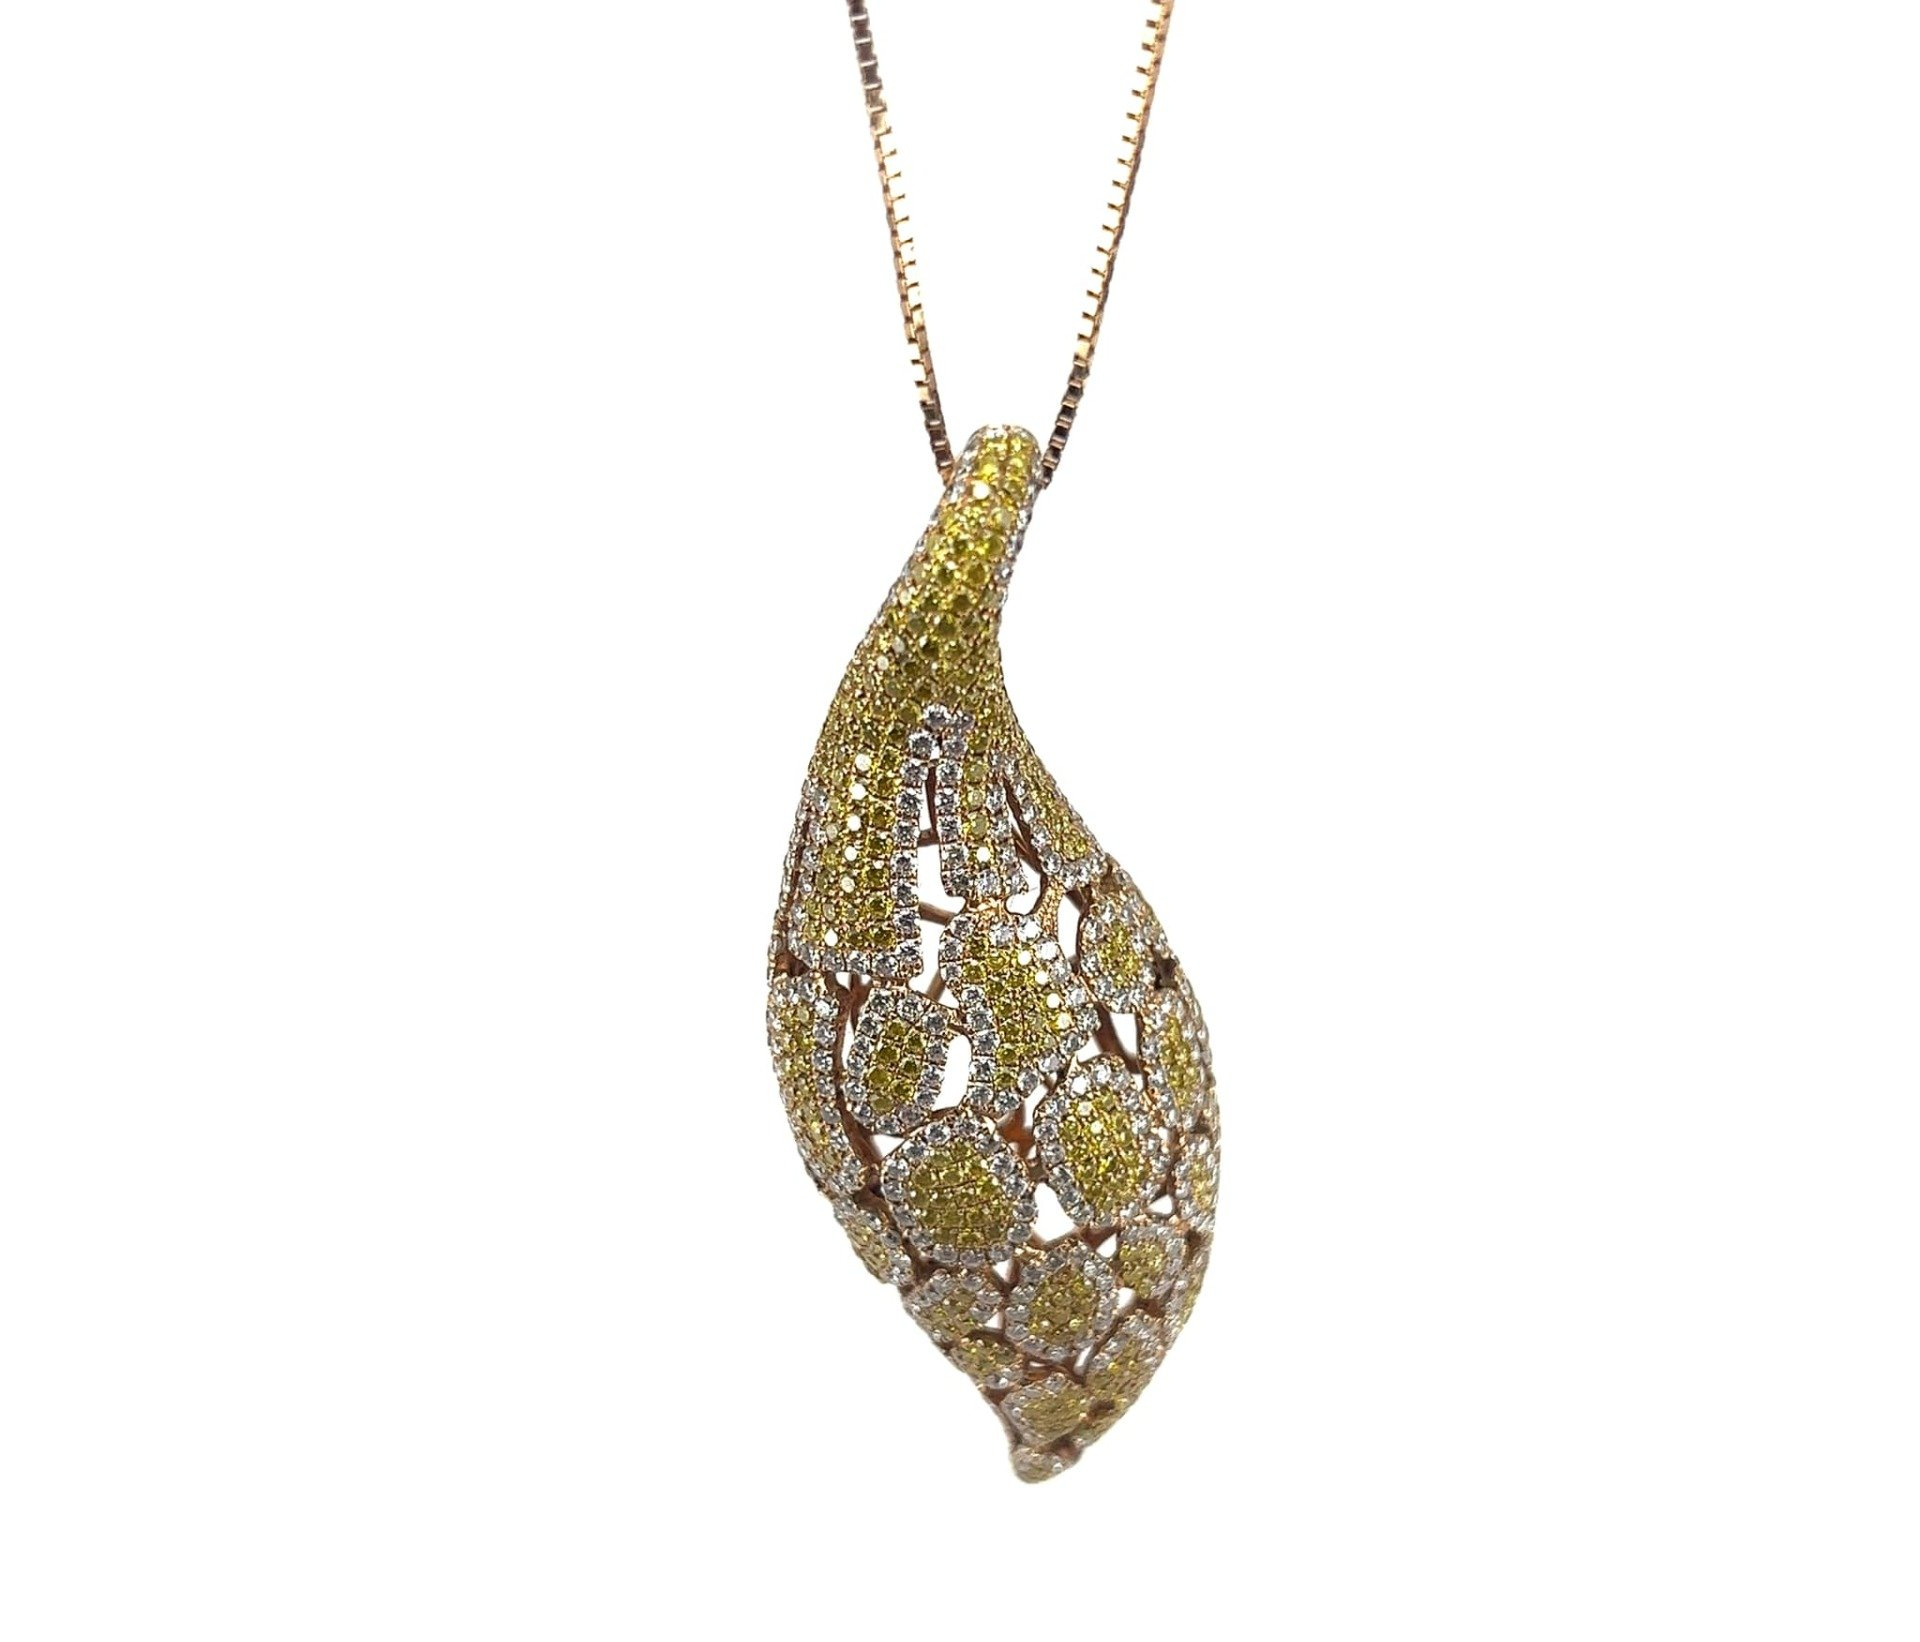 A necklace with a pendant in the shape of a leaf